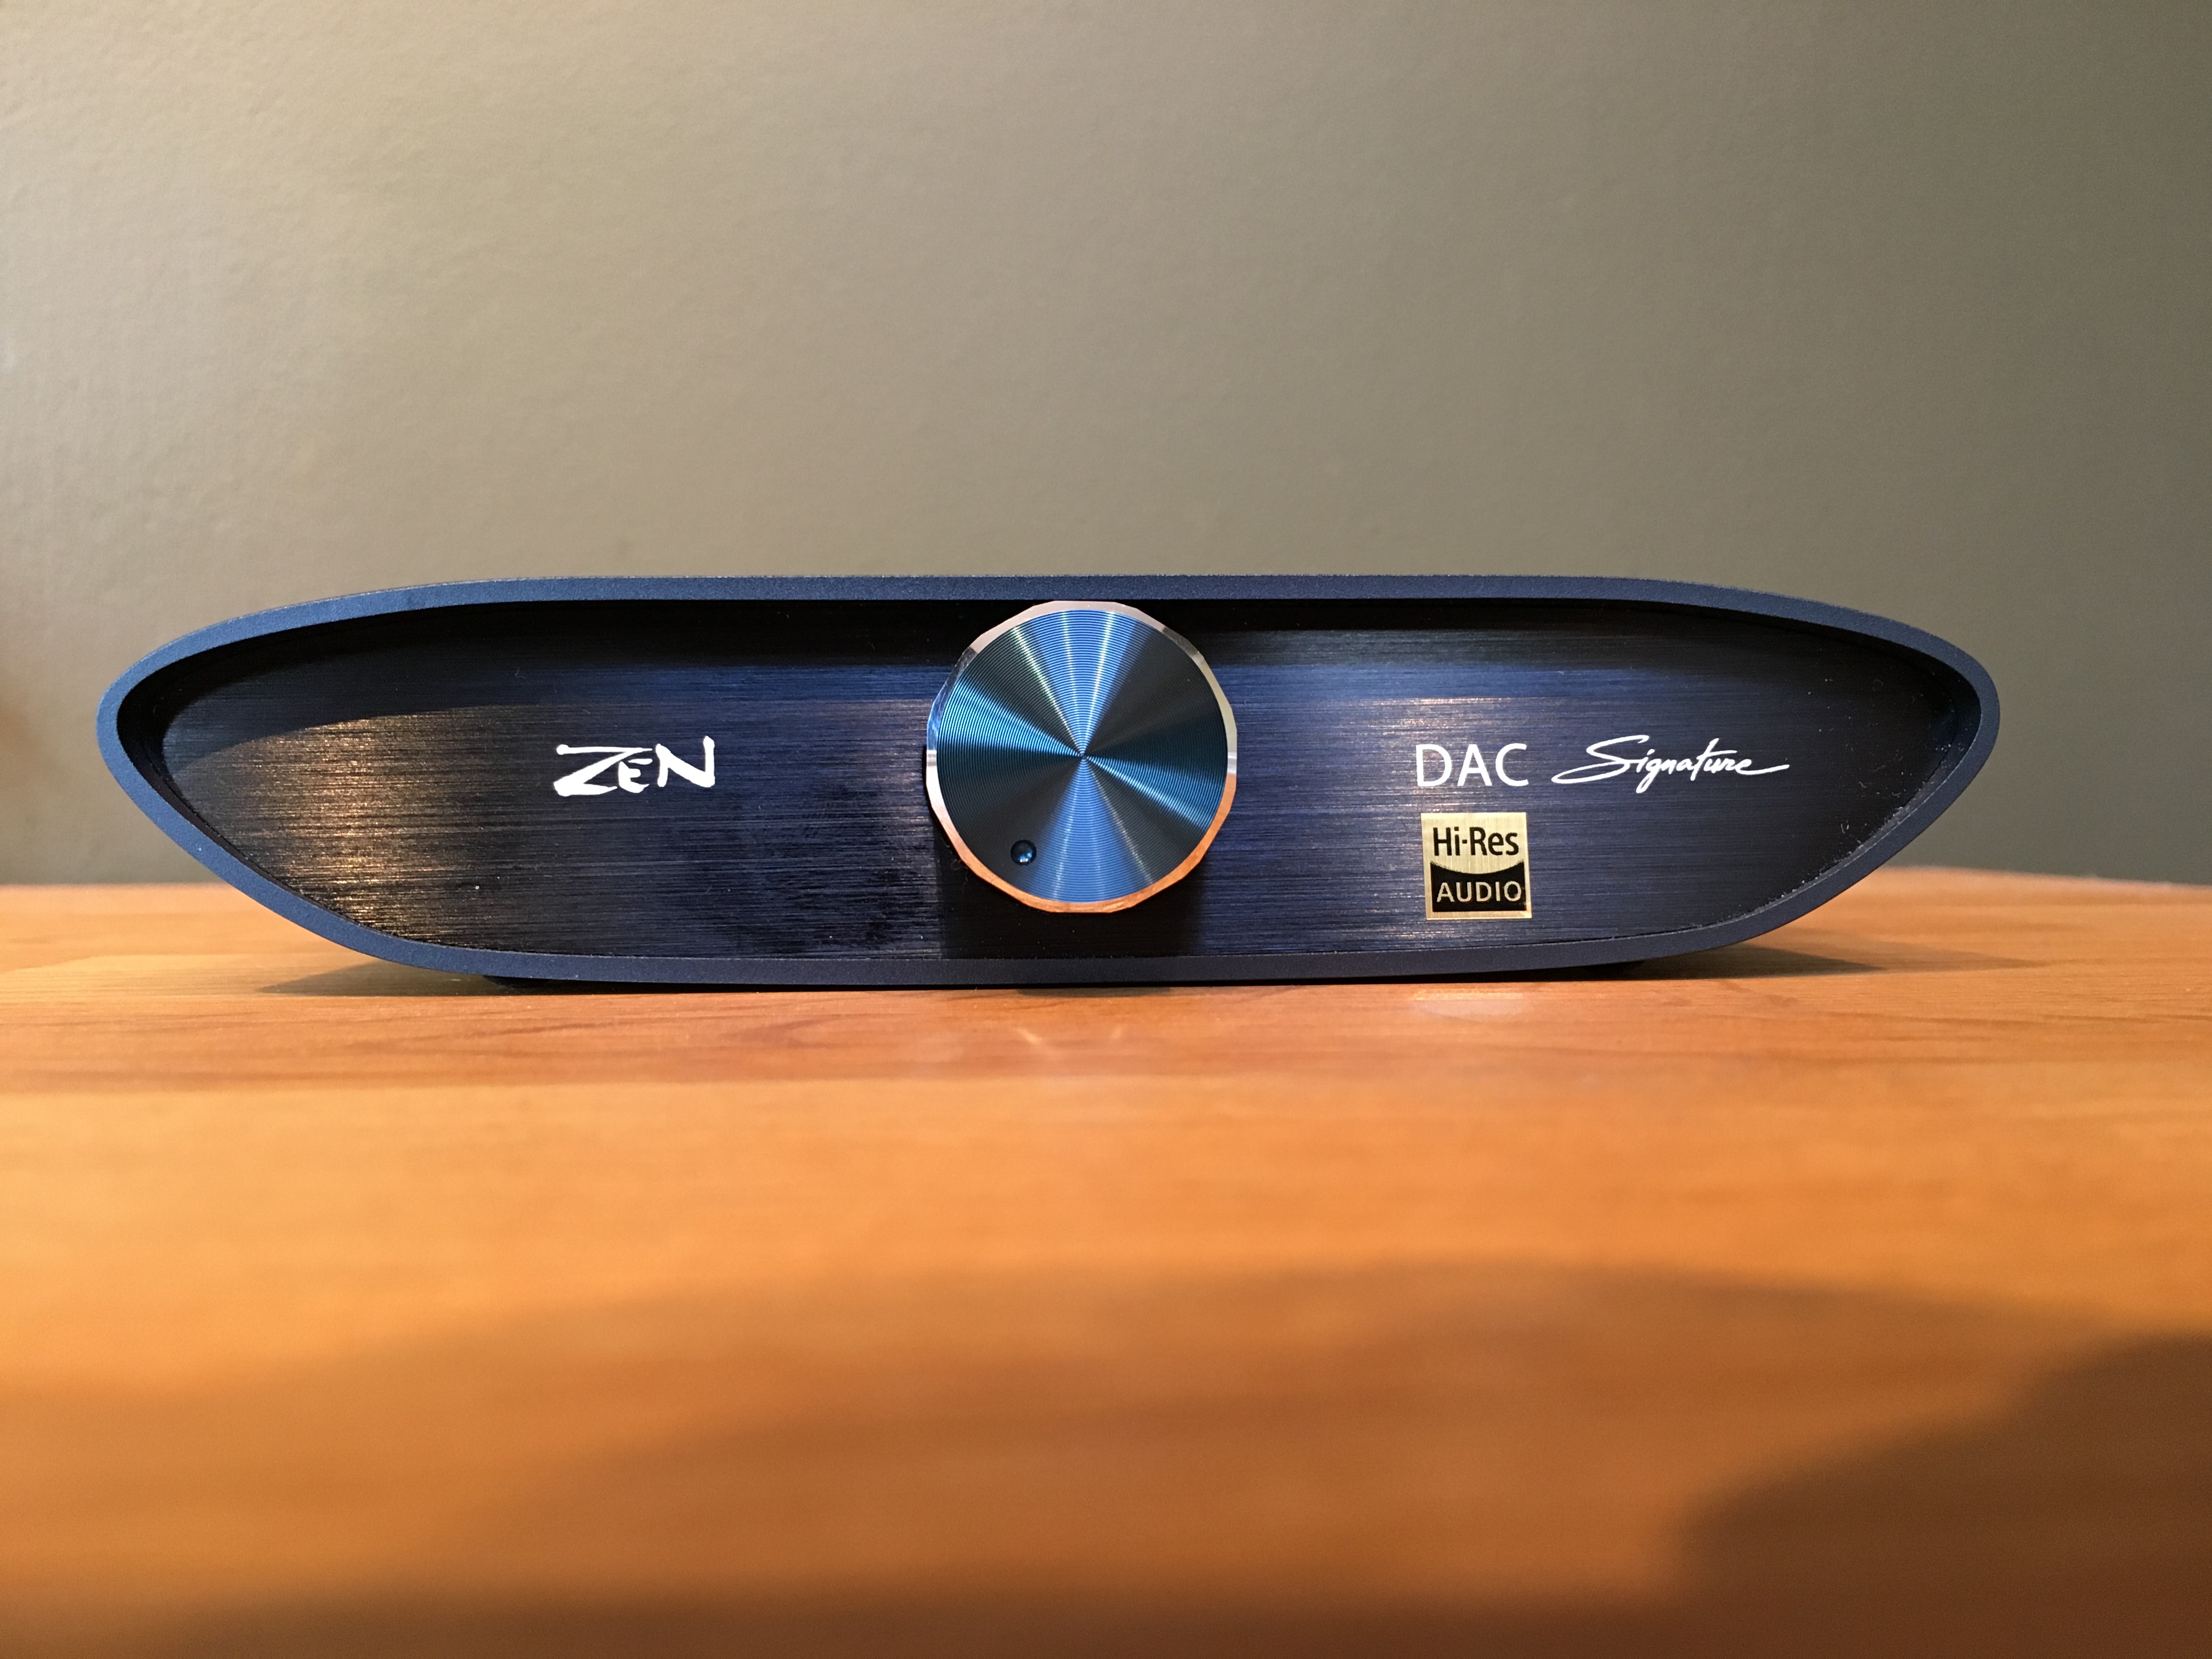 iFi audio ZEN DAC - Reviews | Headphone Reviews and Discussion